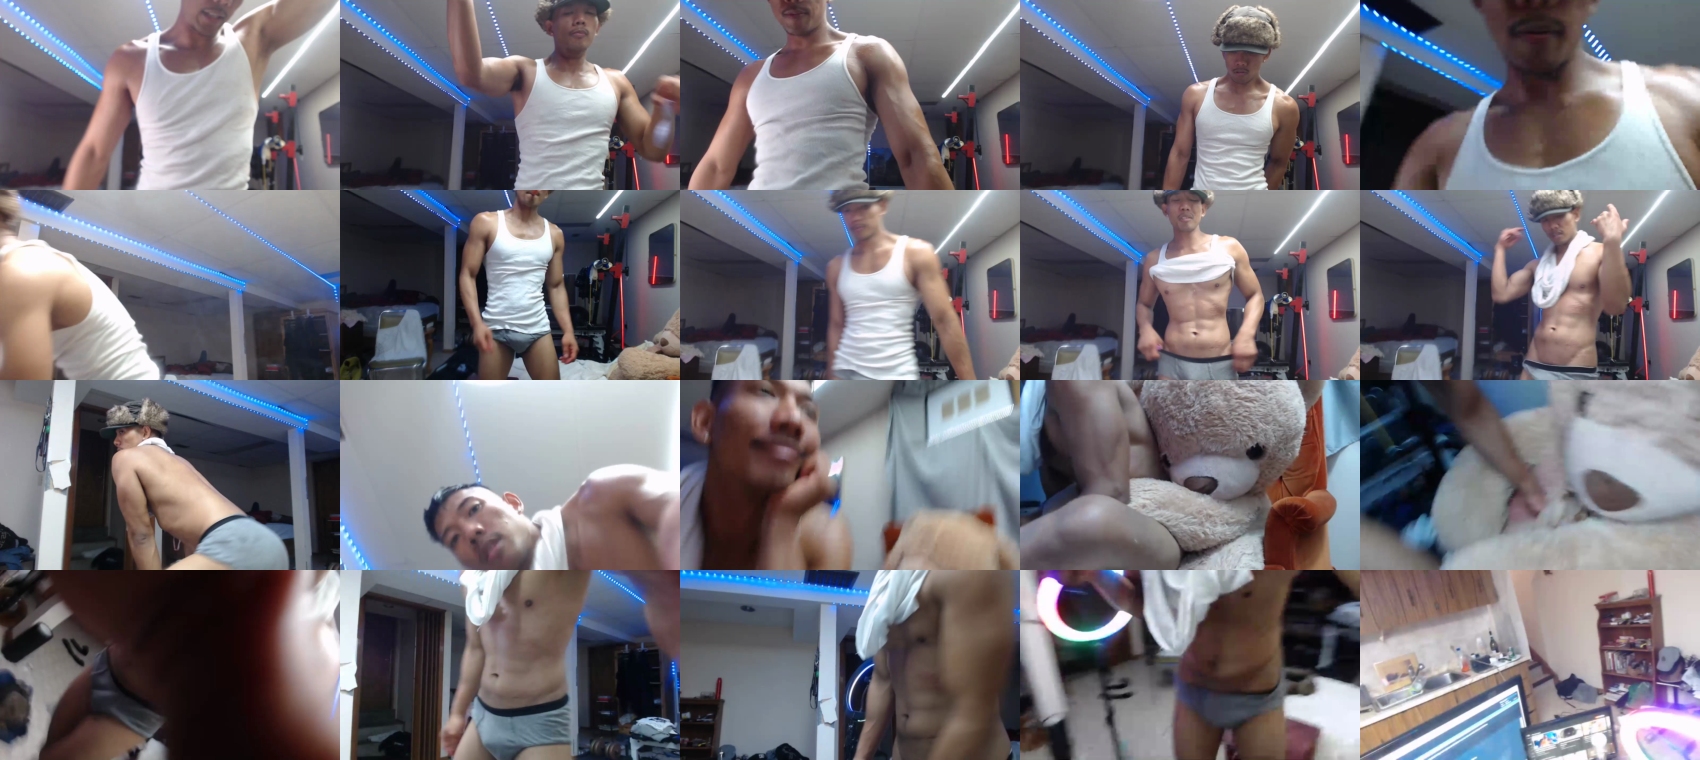 chadclouds kiss CAM SHOW @ Chaturbate 20-08-2022